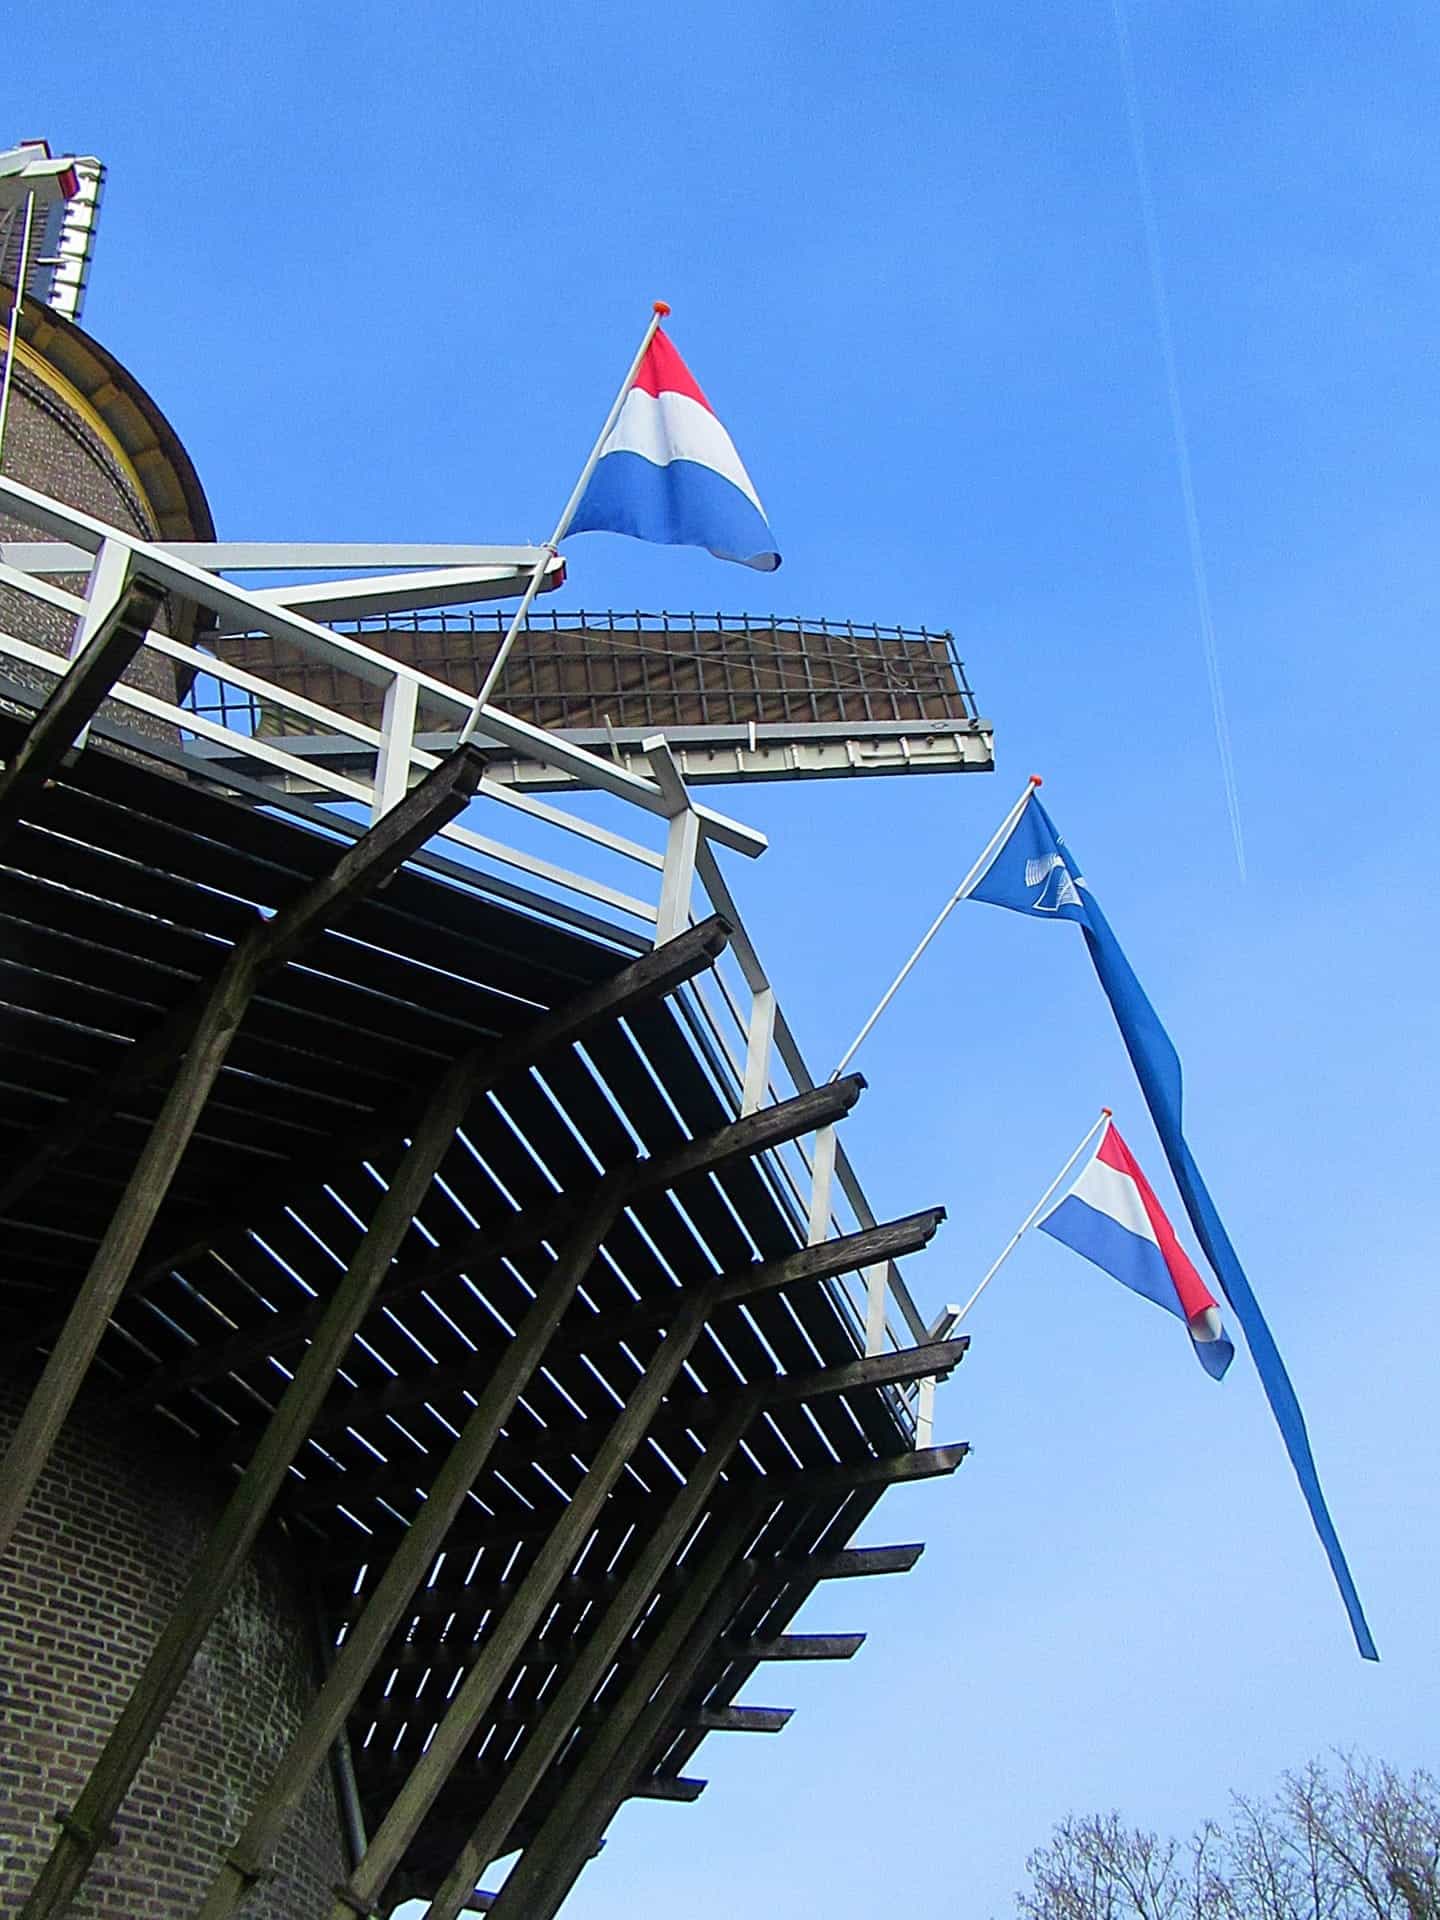 Top of a wooden mill with two Netherlands flags and one light blue flag